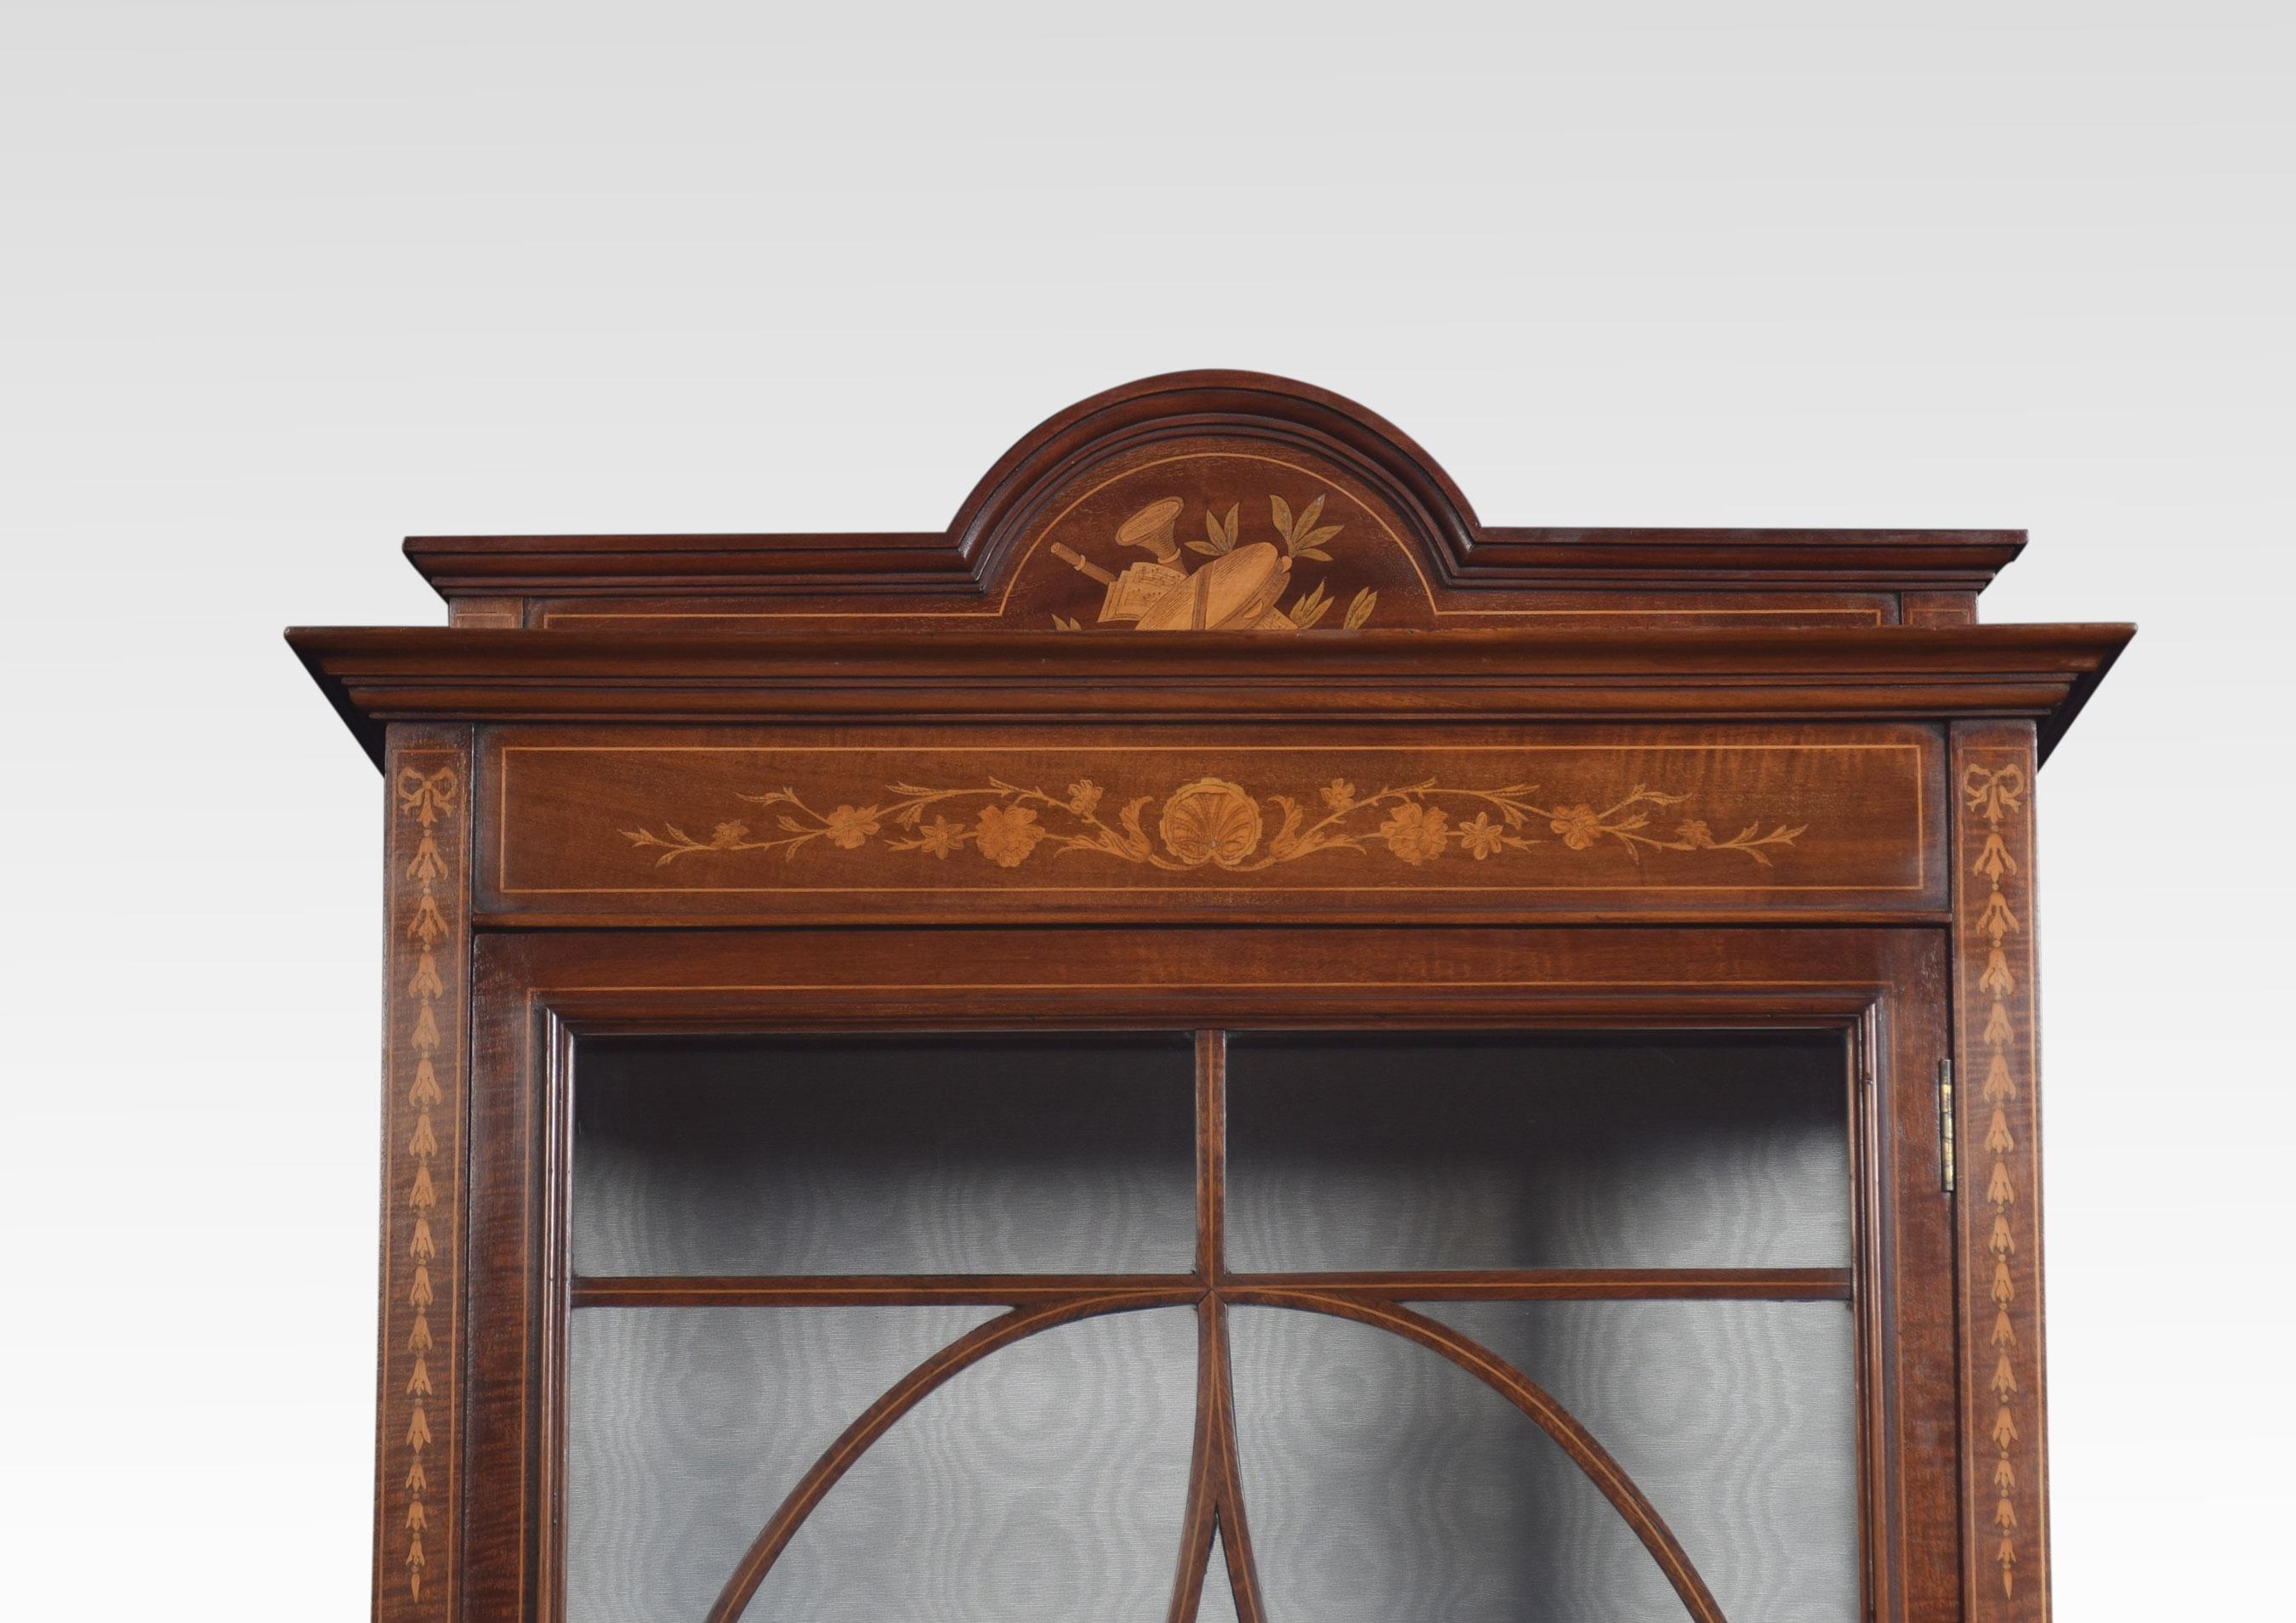 Mahogany inlaid display cabinet, the raised back with musical inlaid detail above large single glazed door opening reveal upholstered interior with two glazed shelves. All raised up on square section tapering legs terminating in spade